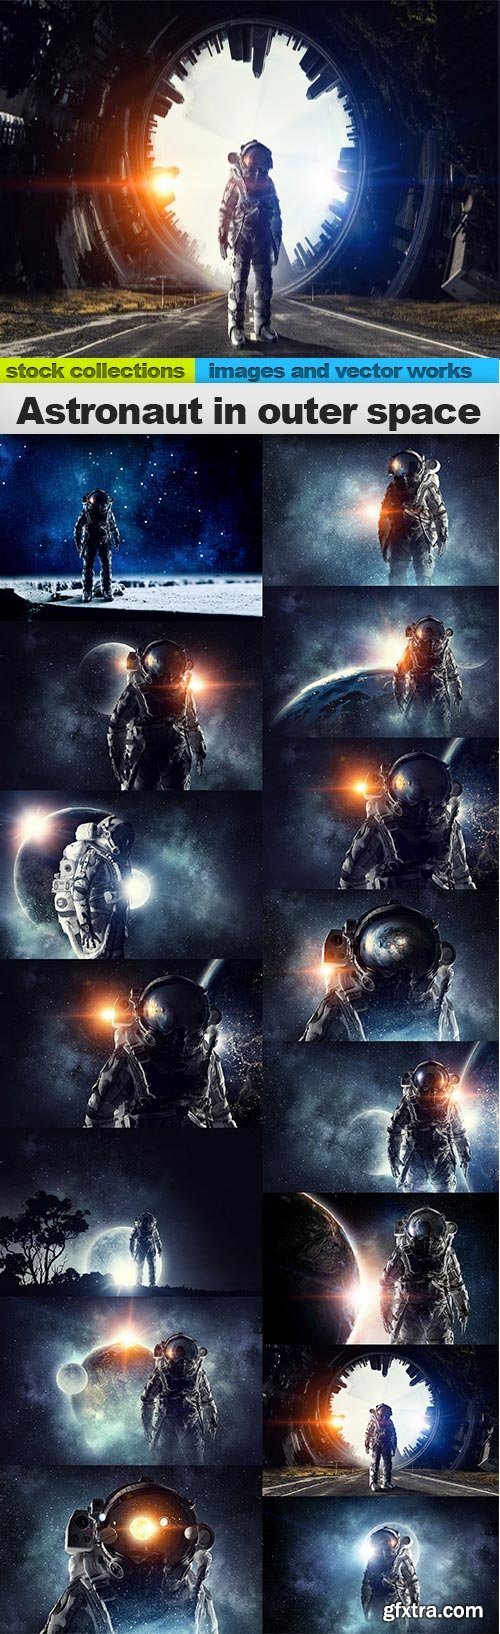 Astronaut in outer space, 15 x UHQ JPEG